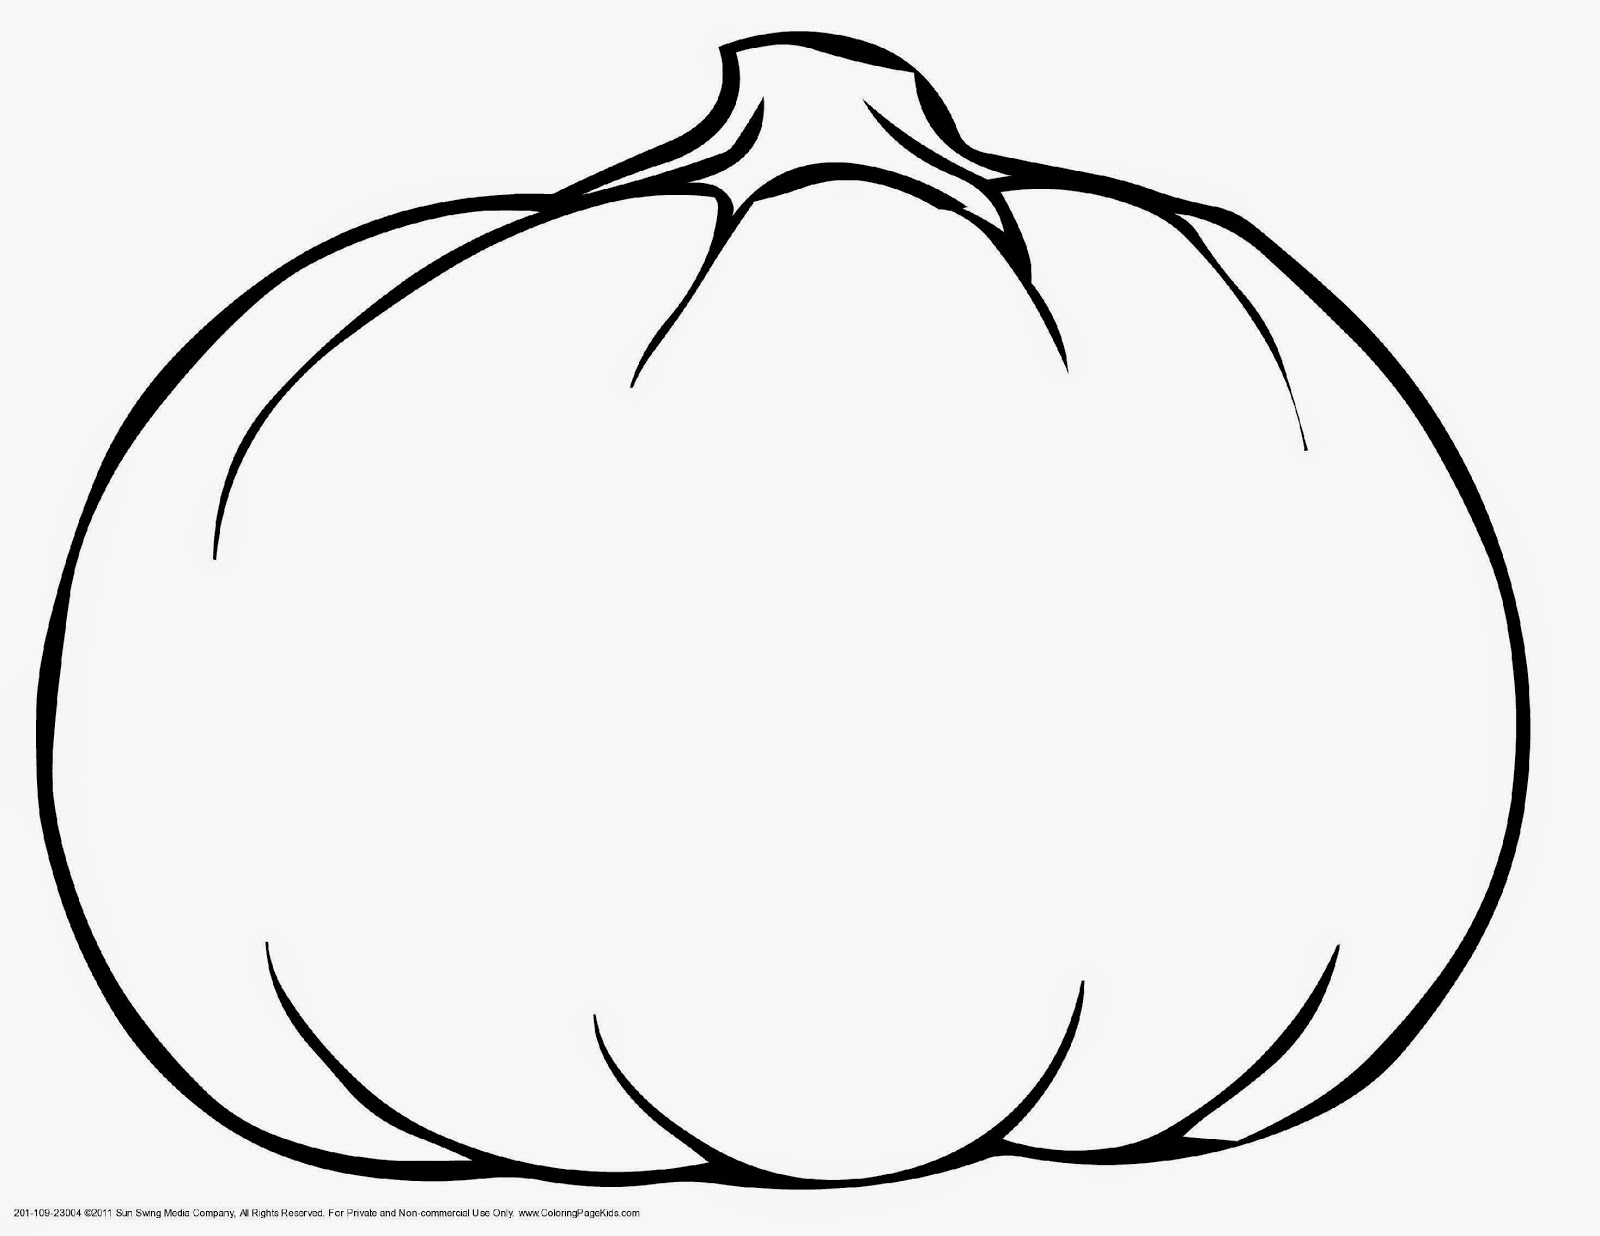 Free Clipart Pumpkin Black And White, Download Free Clip Art.